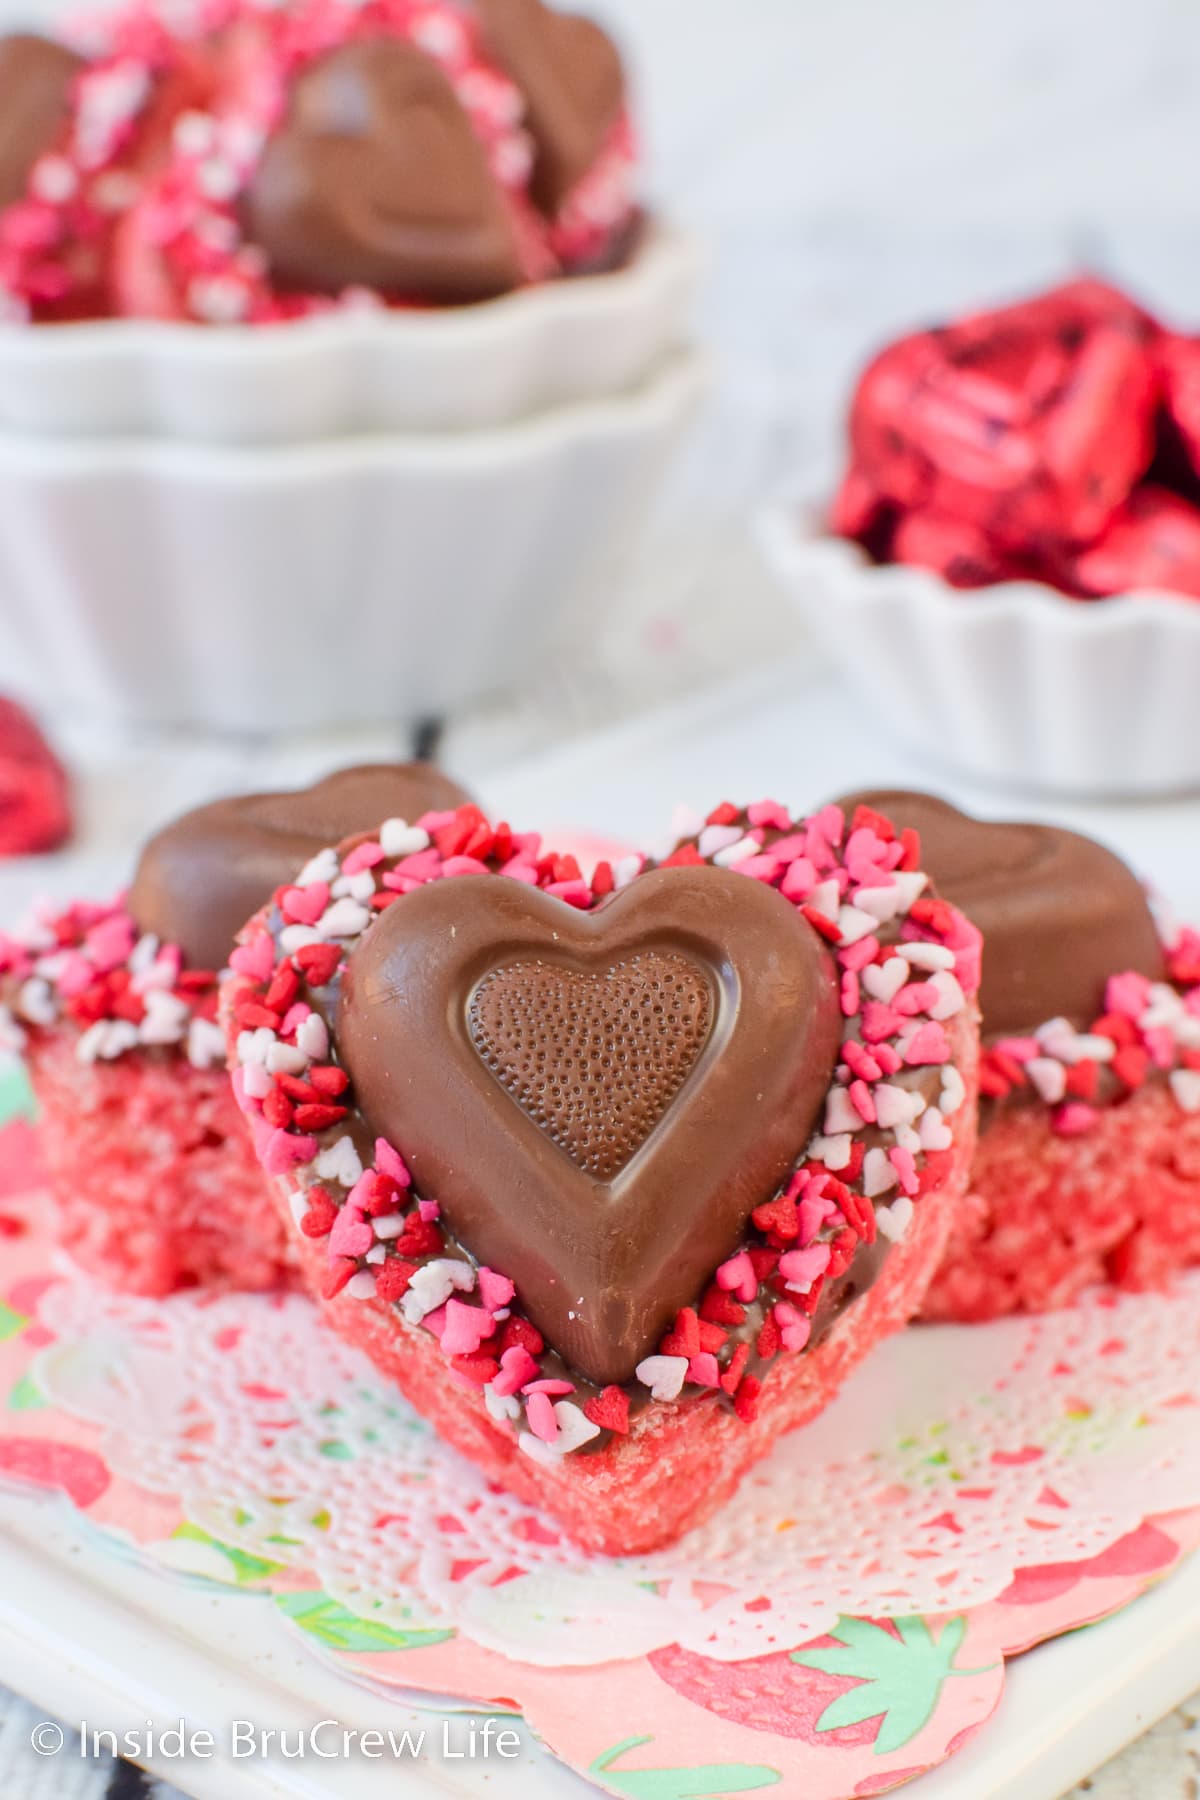 Pink rice krispie treats cut into hearts and topped with a chocolate heart on a white tray.